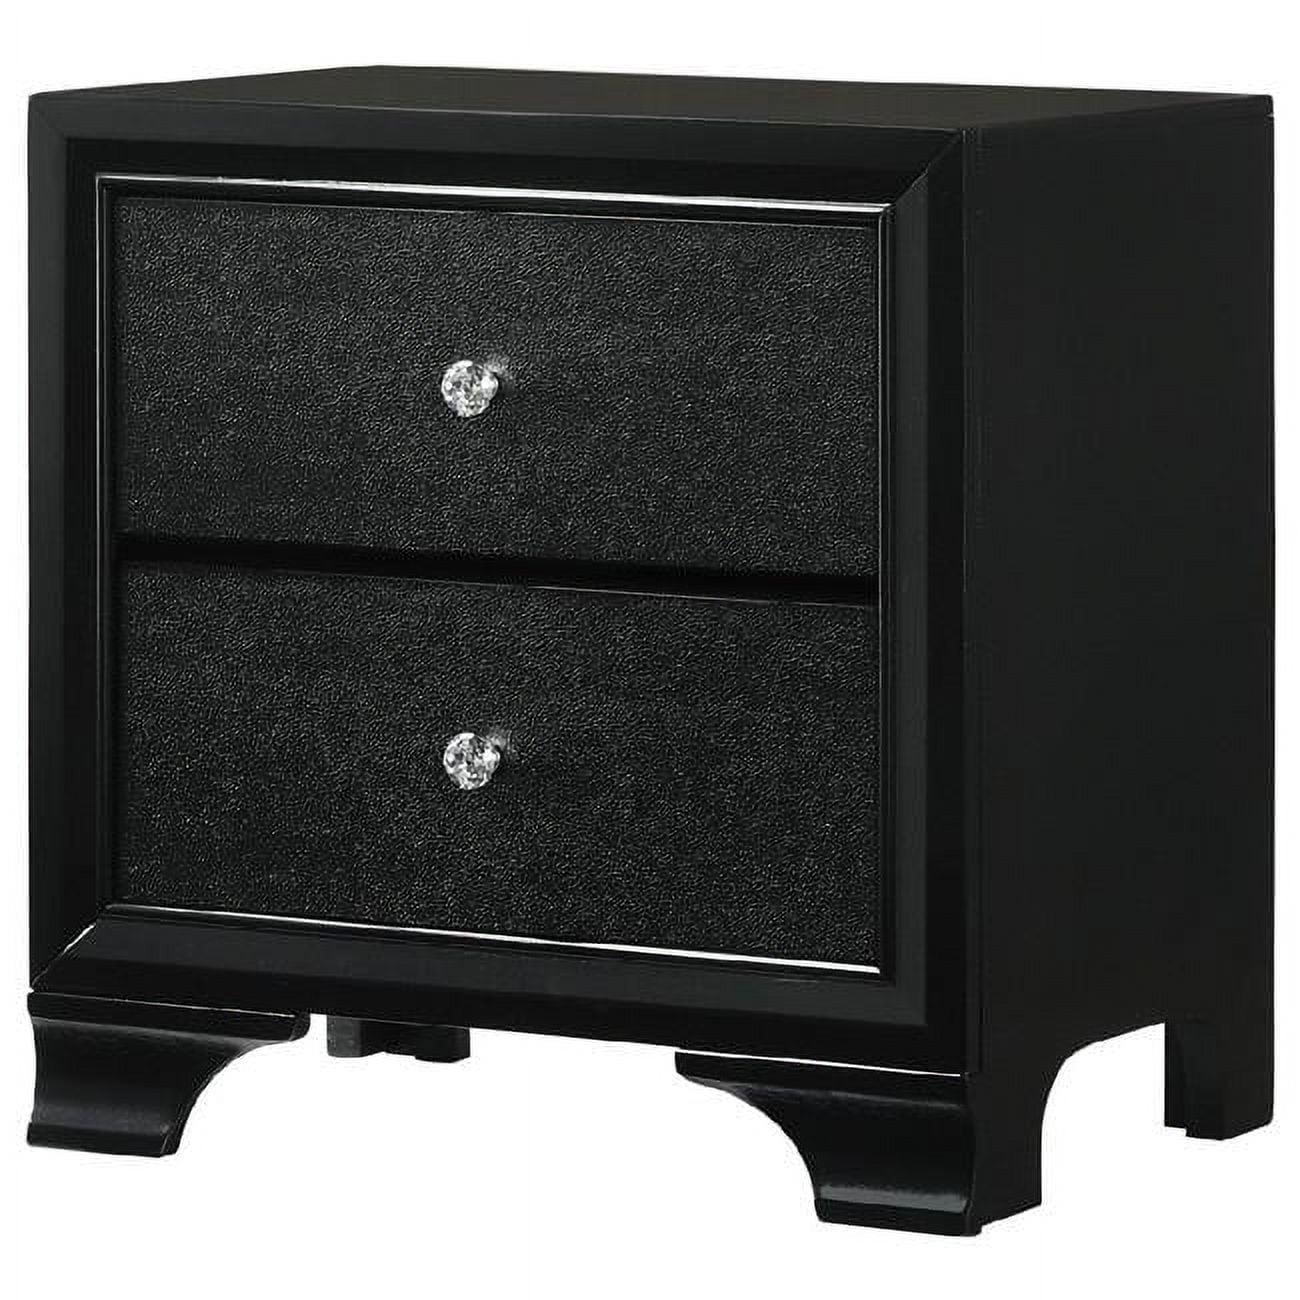 Contemporary Black Solid Wood Nightstand with Crystal Knob Pulls - 24"